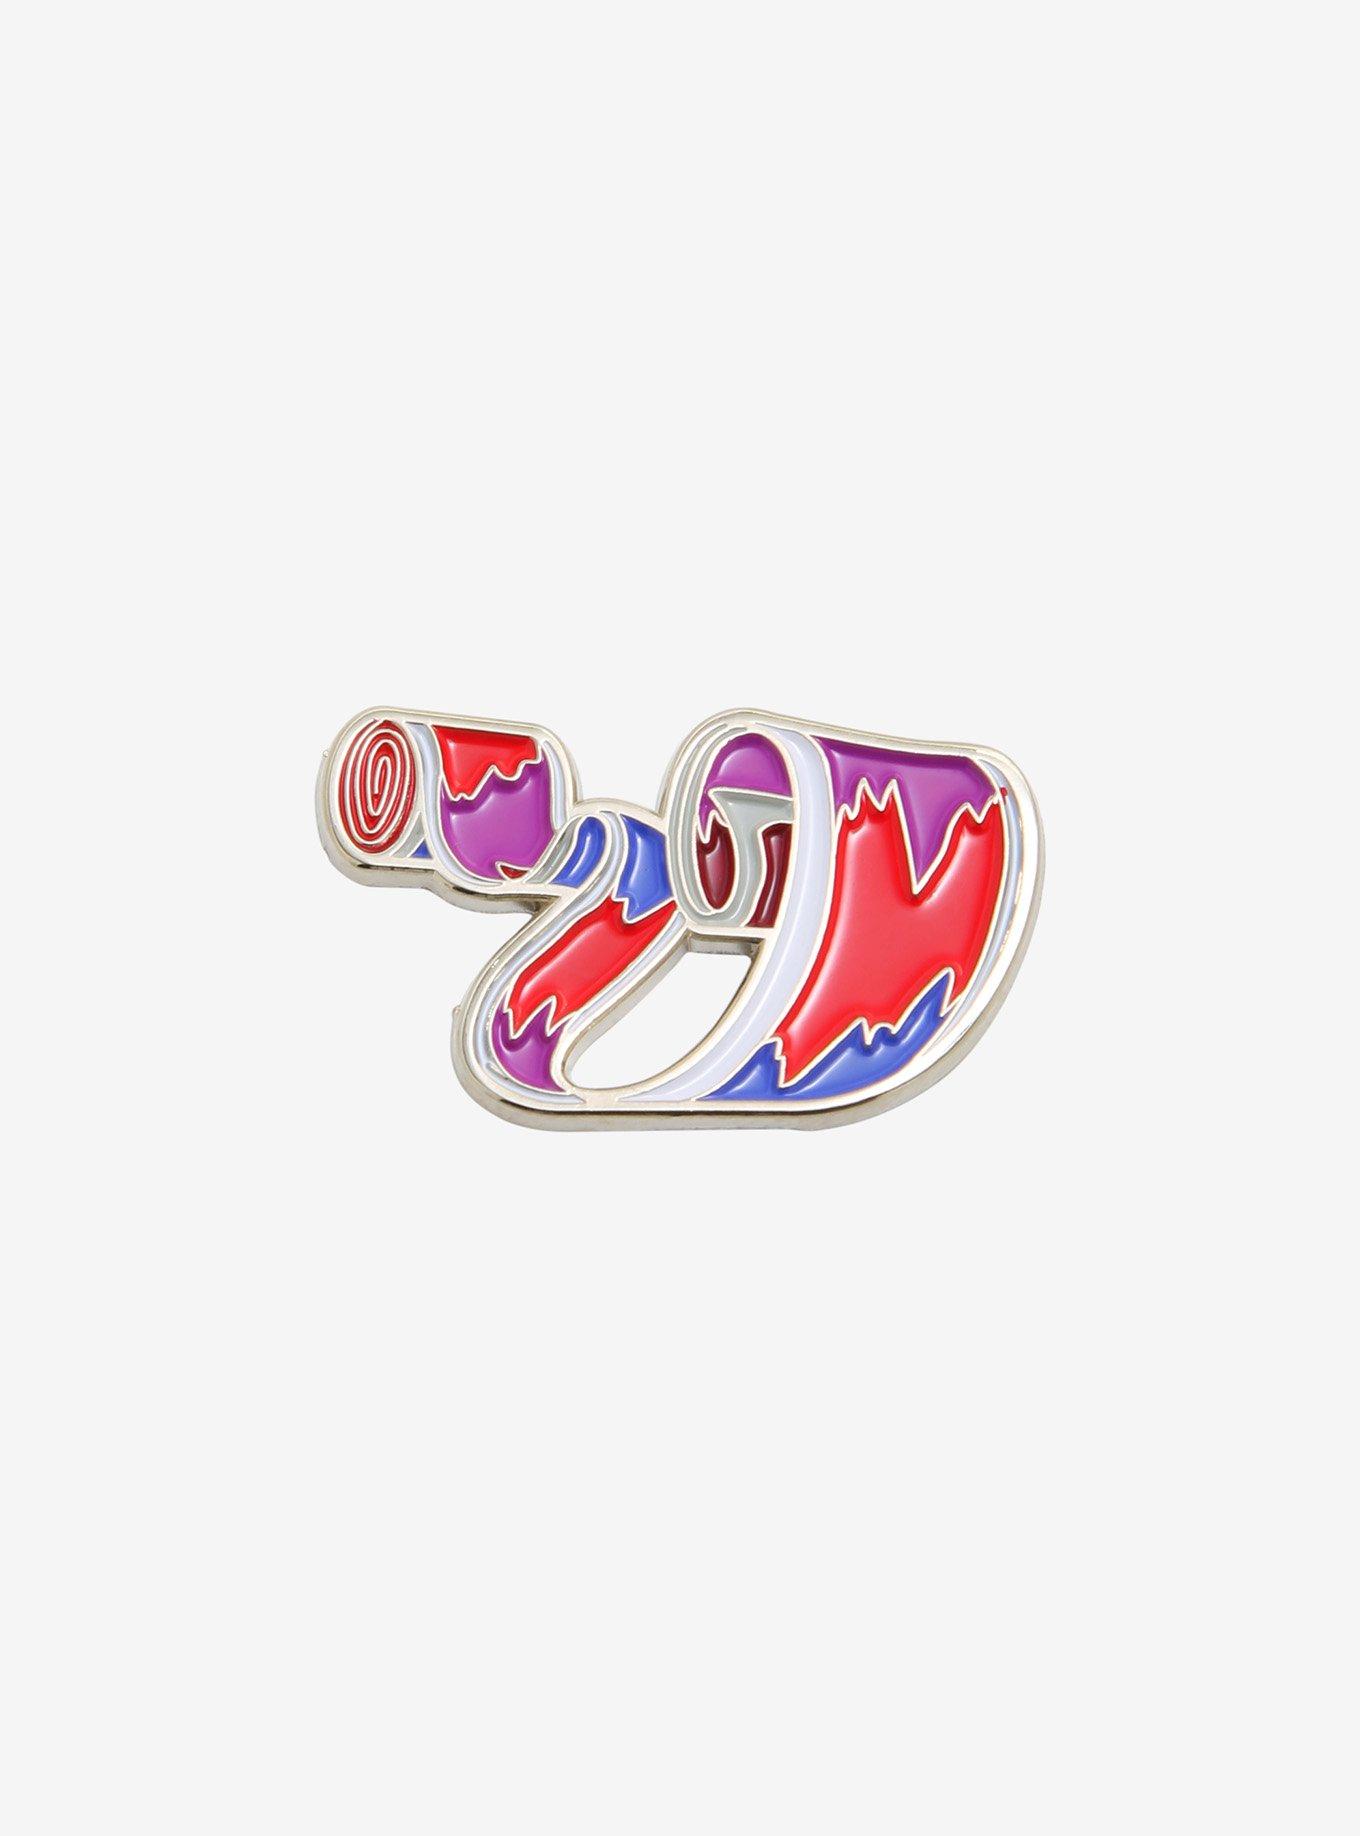 Fruit Snack Roll Enamel Pin - BoxLunch Exclusive | BoxLunch